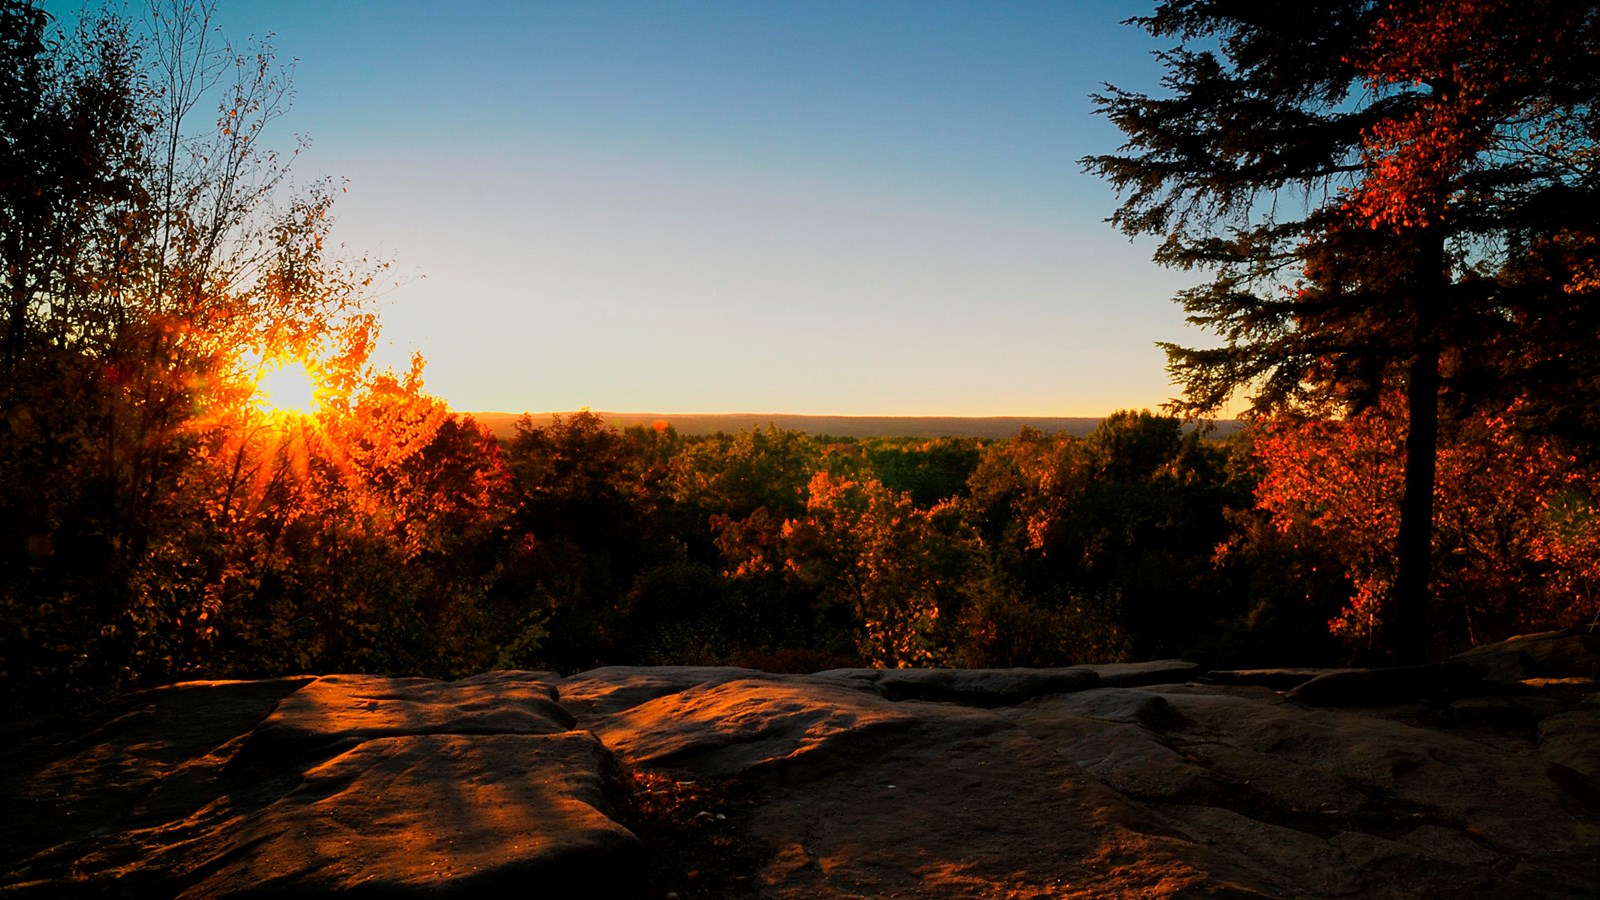 View from a rocky ledge looking out at a sunset over fall treetops.